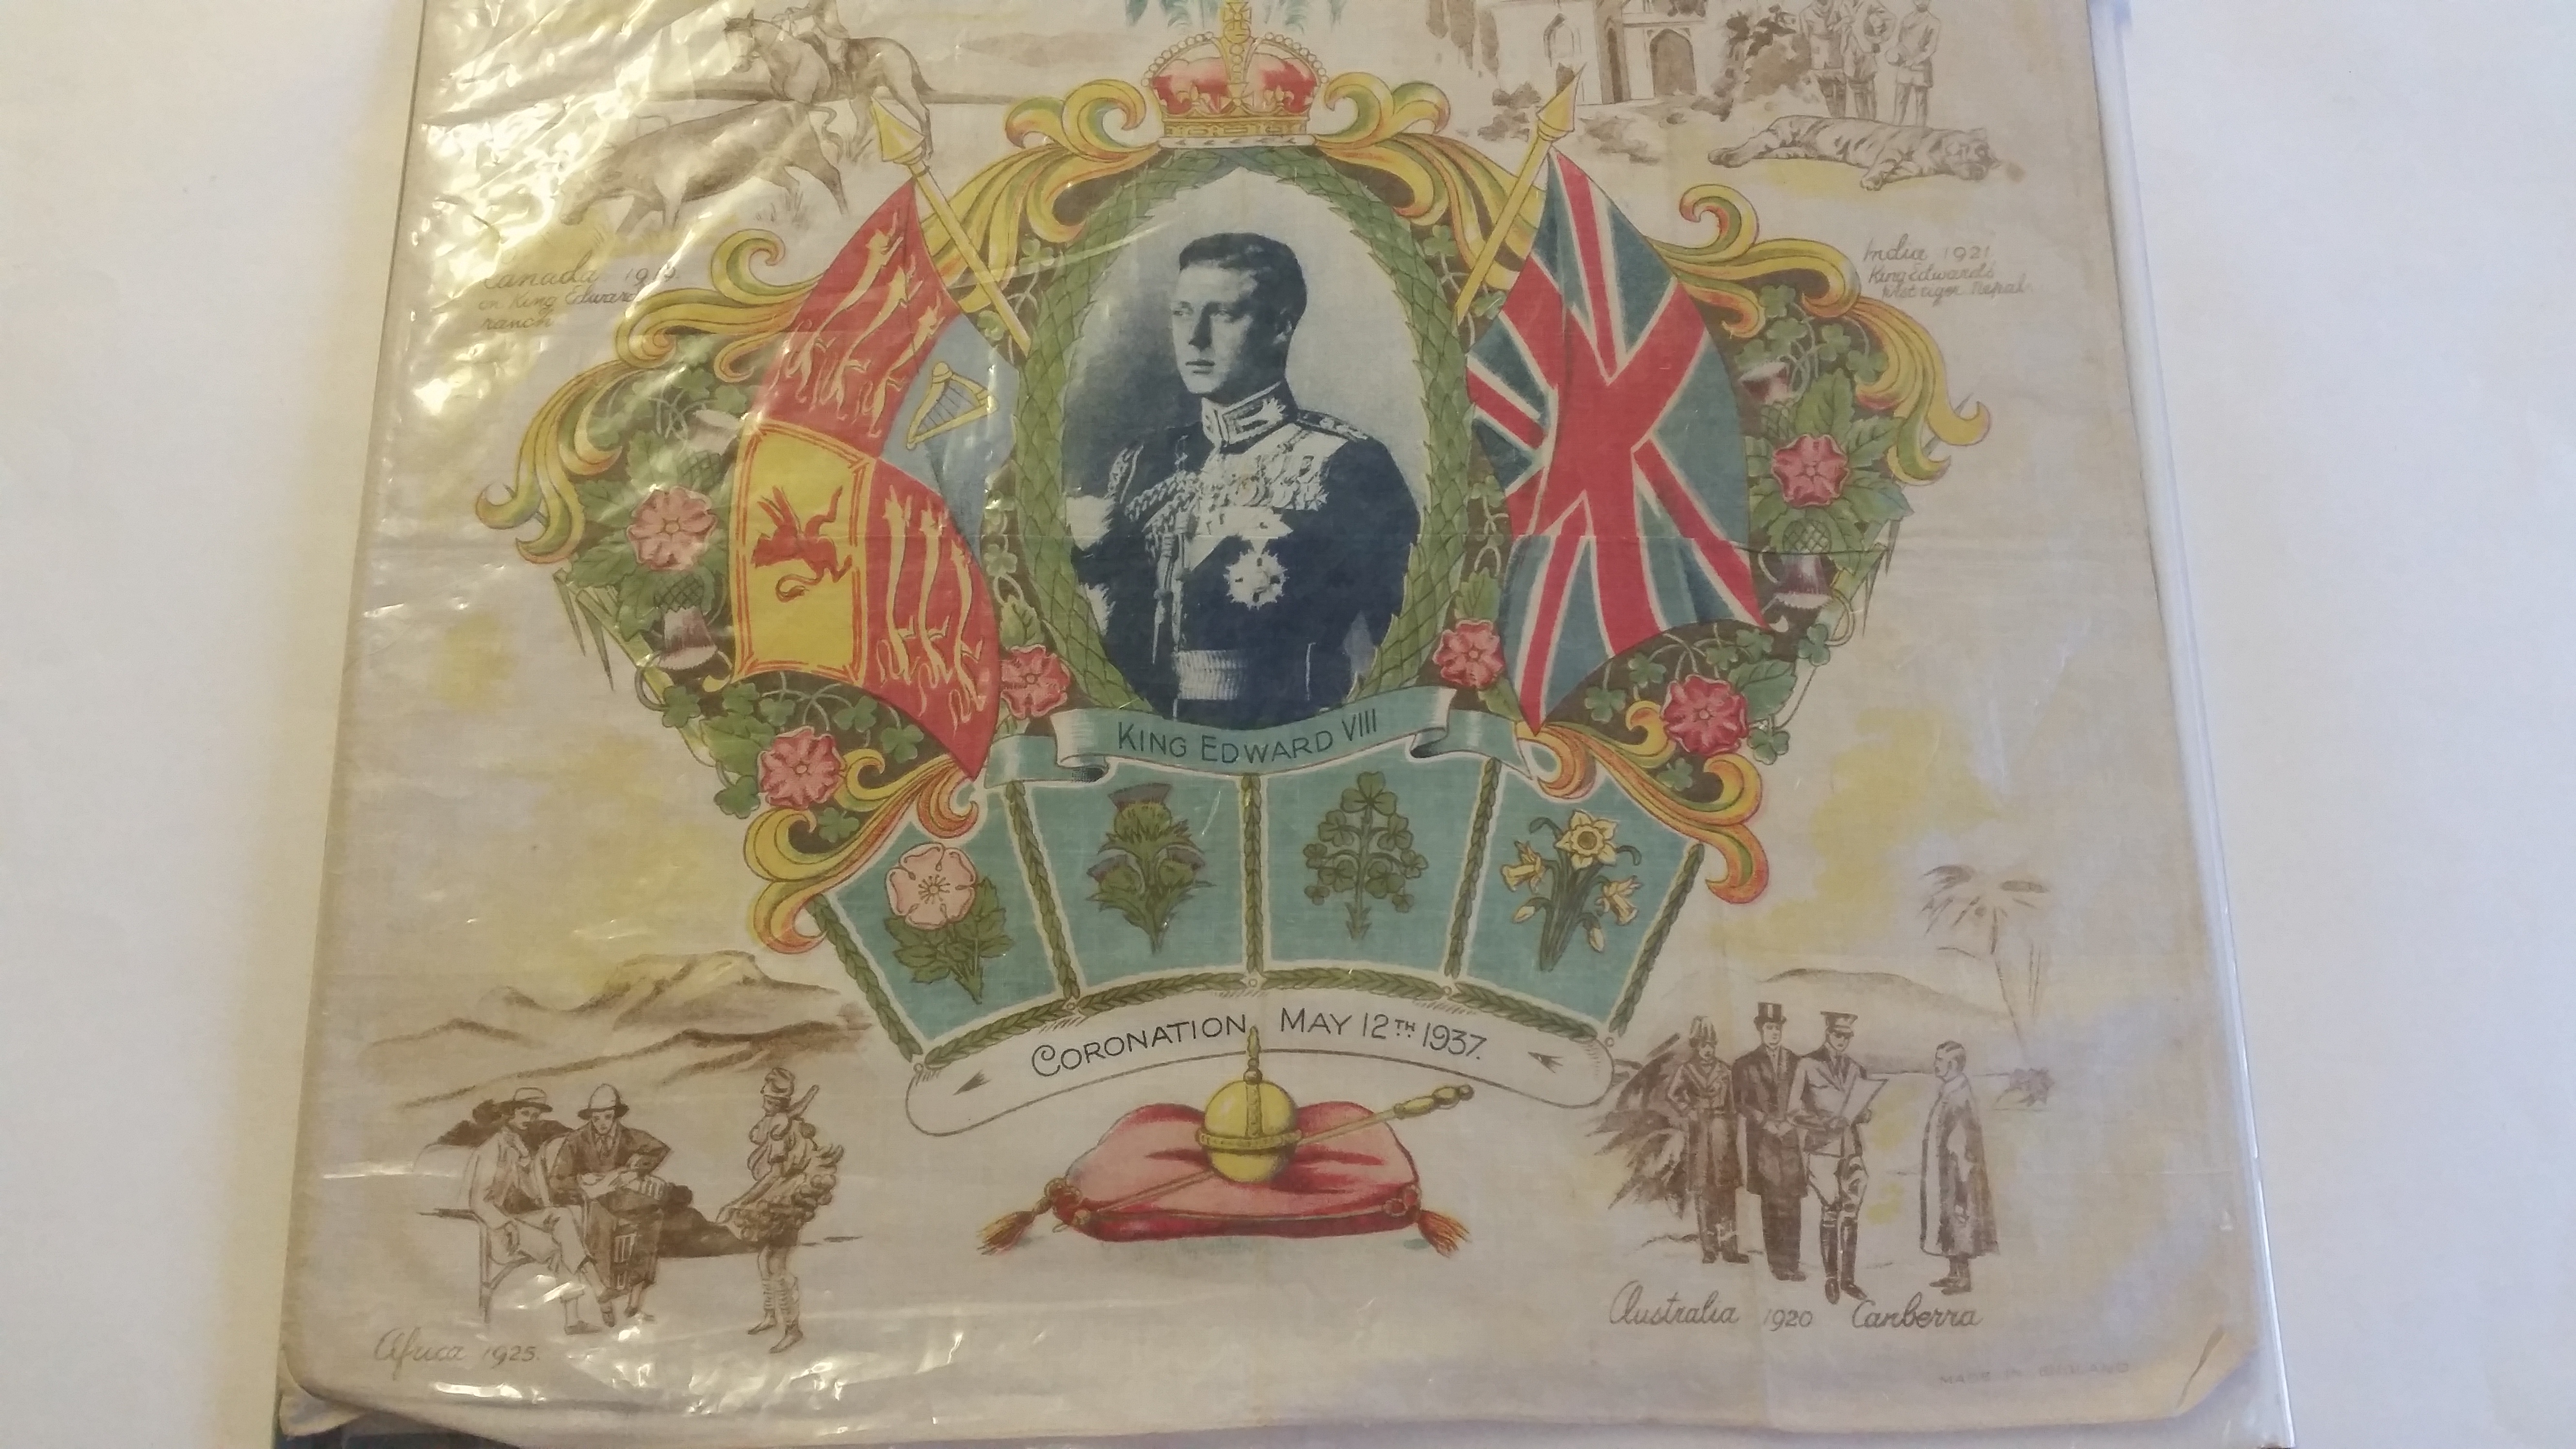 ROYALTY, colour cotton panel, King Edward VIII - Coronation, May 12th 1937, with central portrait